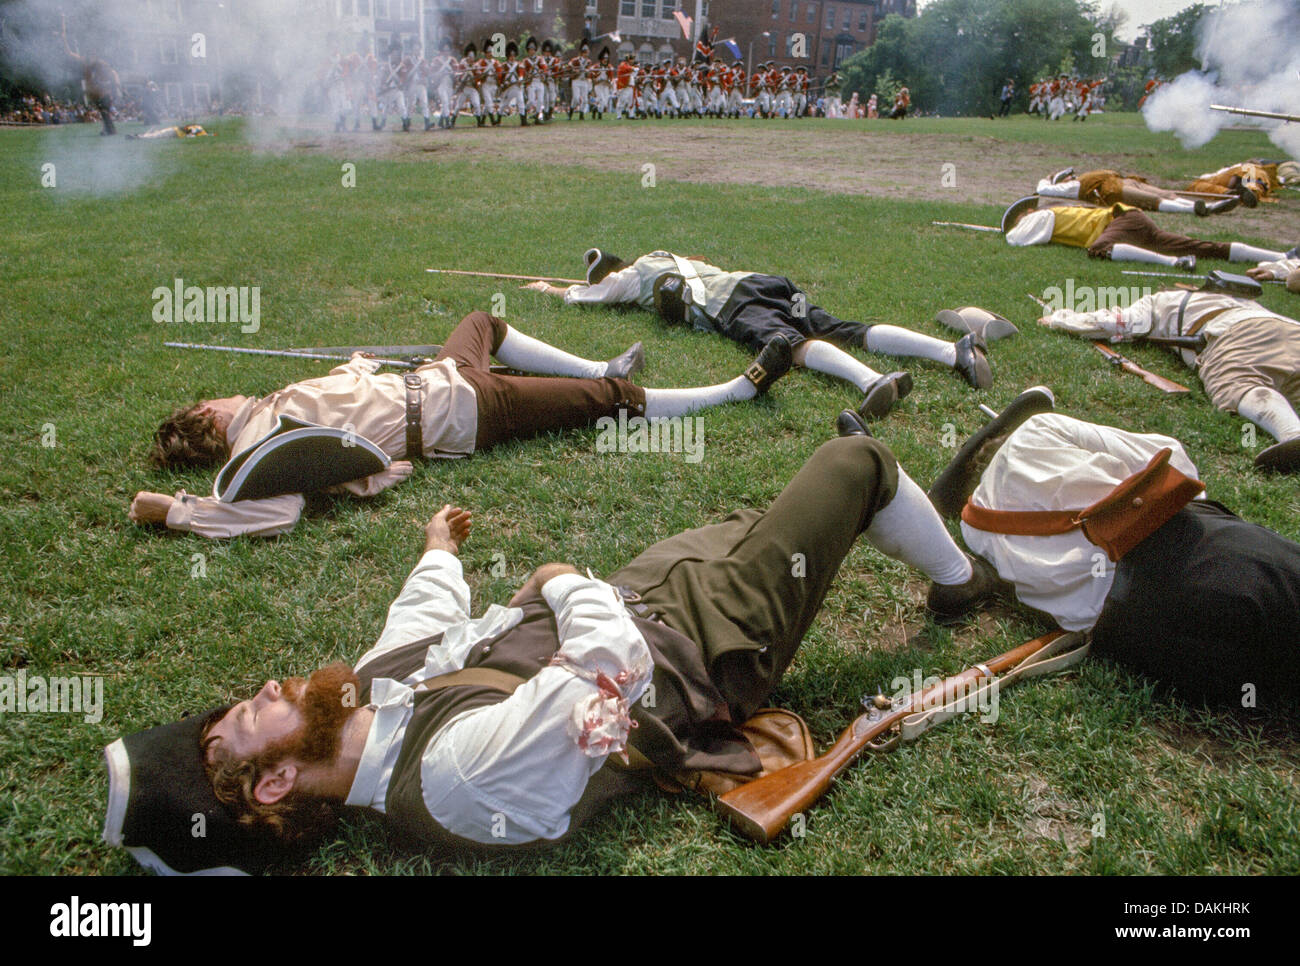 Patriots take casualties defending fortifications in a reenactment of the 1775 Battle of Bunker Hill, Charlestown, Massachusetts Stock Photo